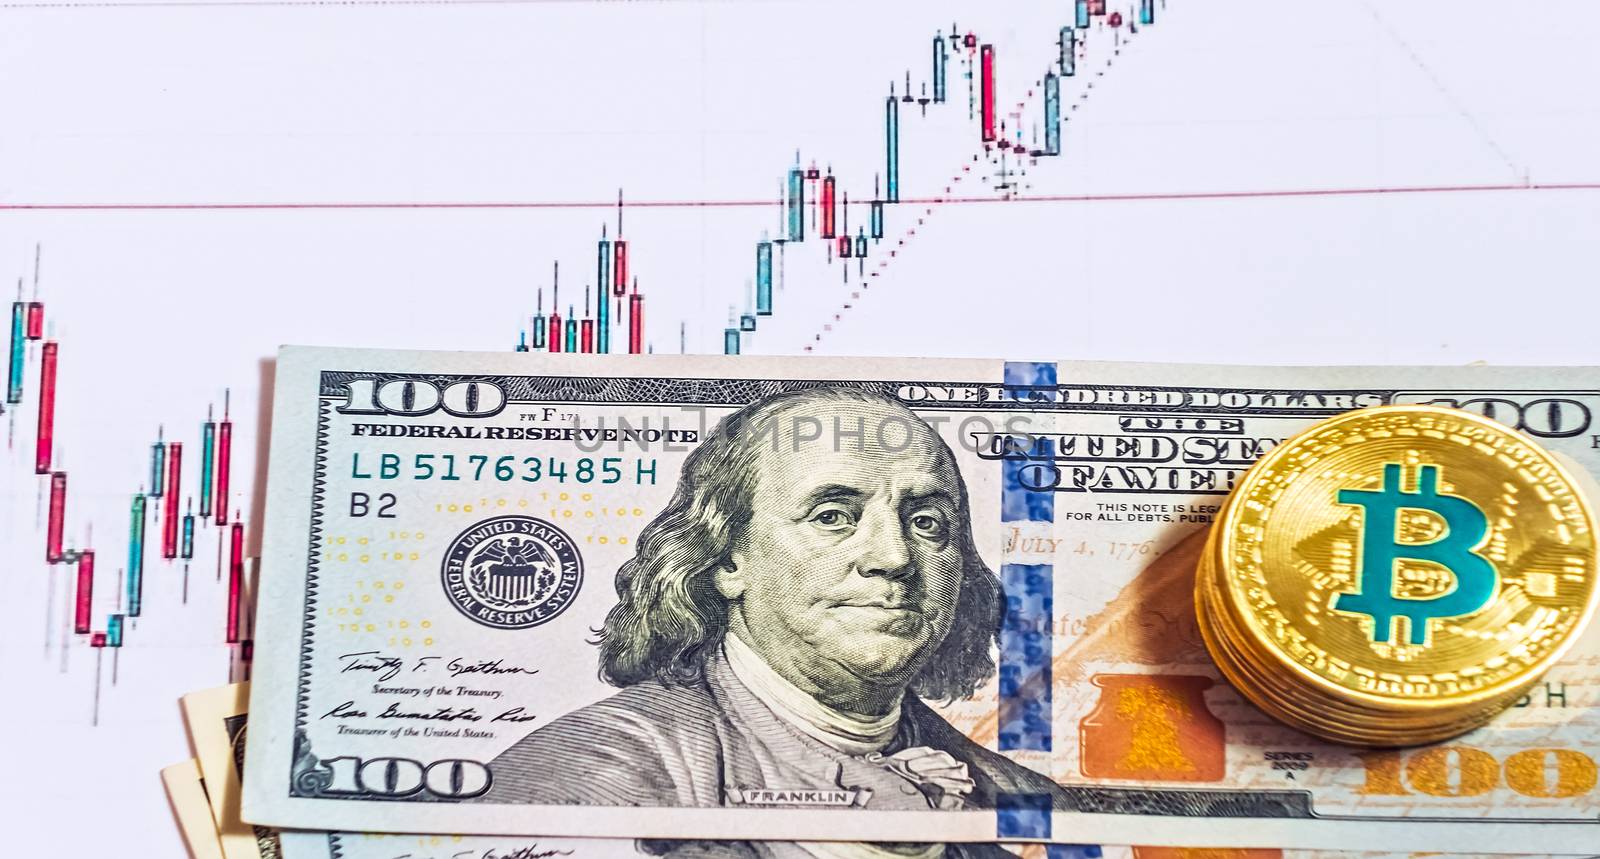 one hundred dollar bill Graph of the course trade bitcoin crypto btc digital marketing analyzing statistical information from vertical bar and charts printed.